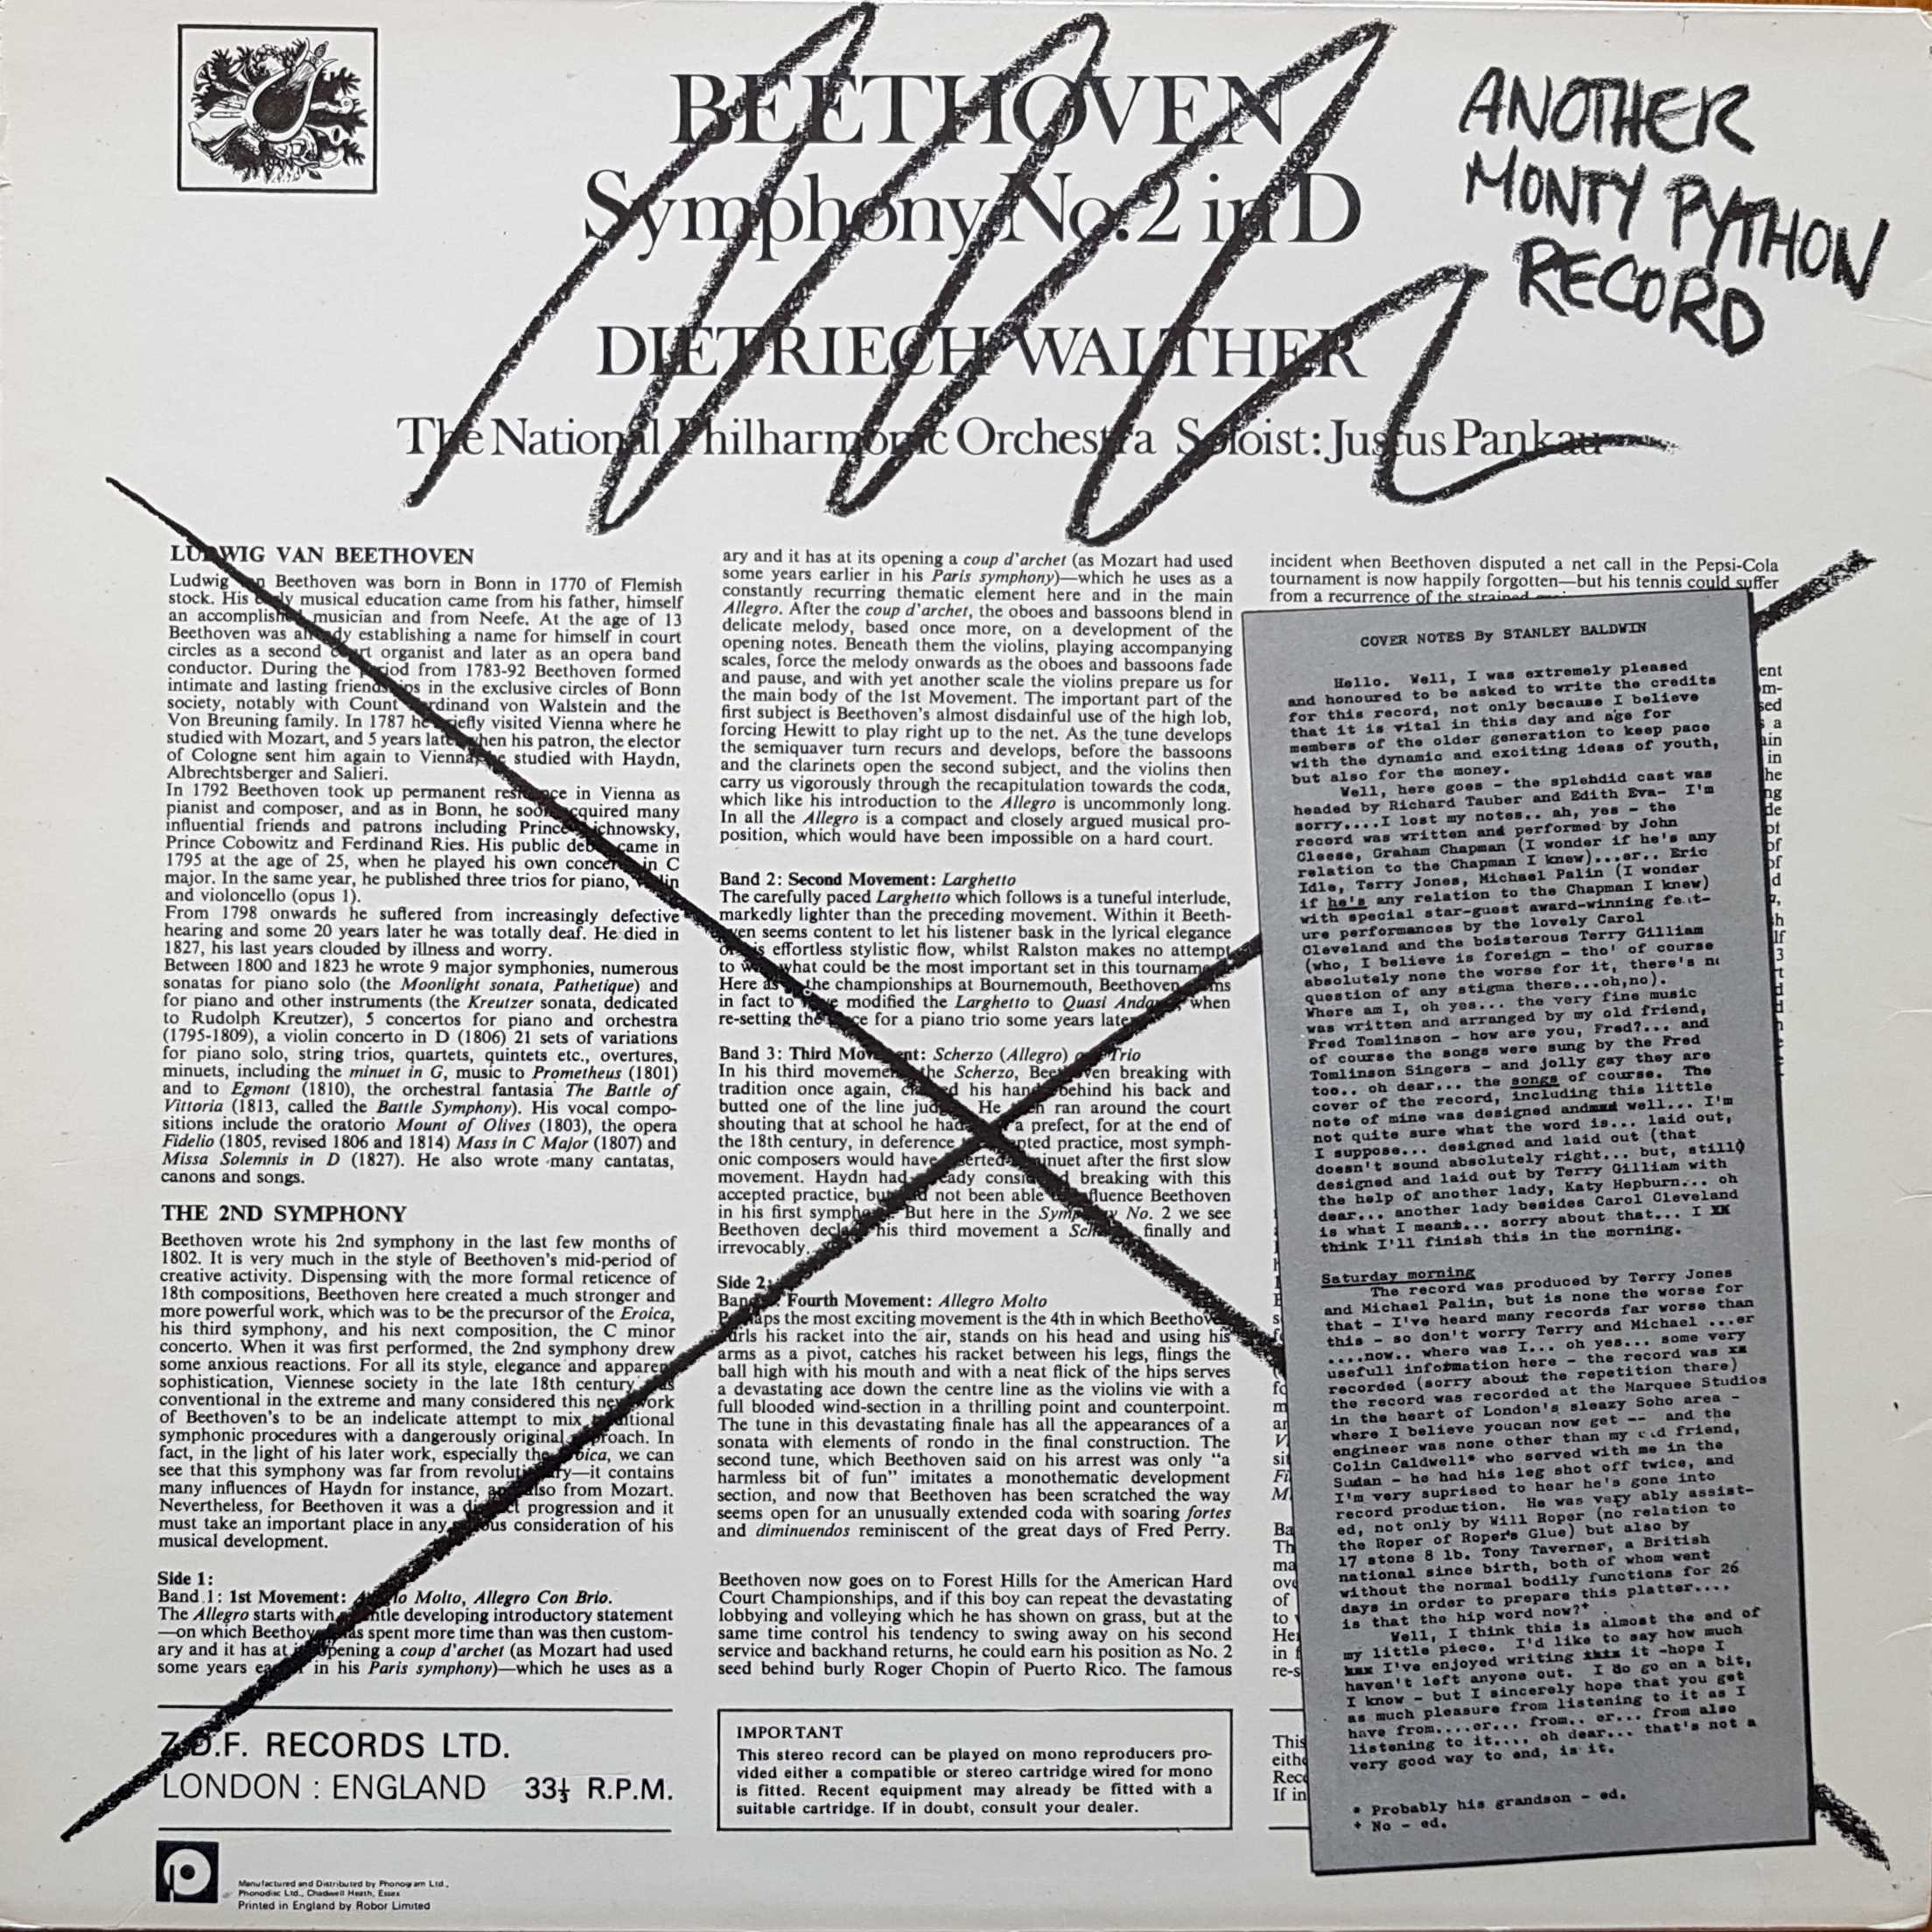 Picture of CAS 1049 Another Monty Python record by artist Monty Python from the BBC records and Tapes library